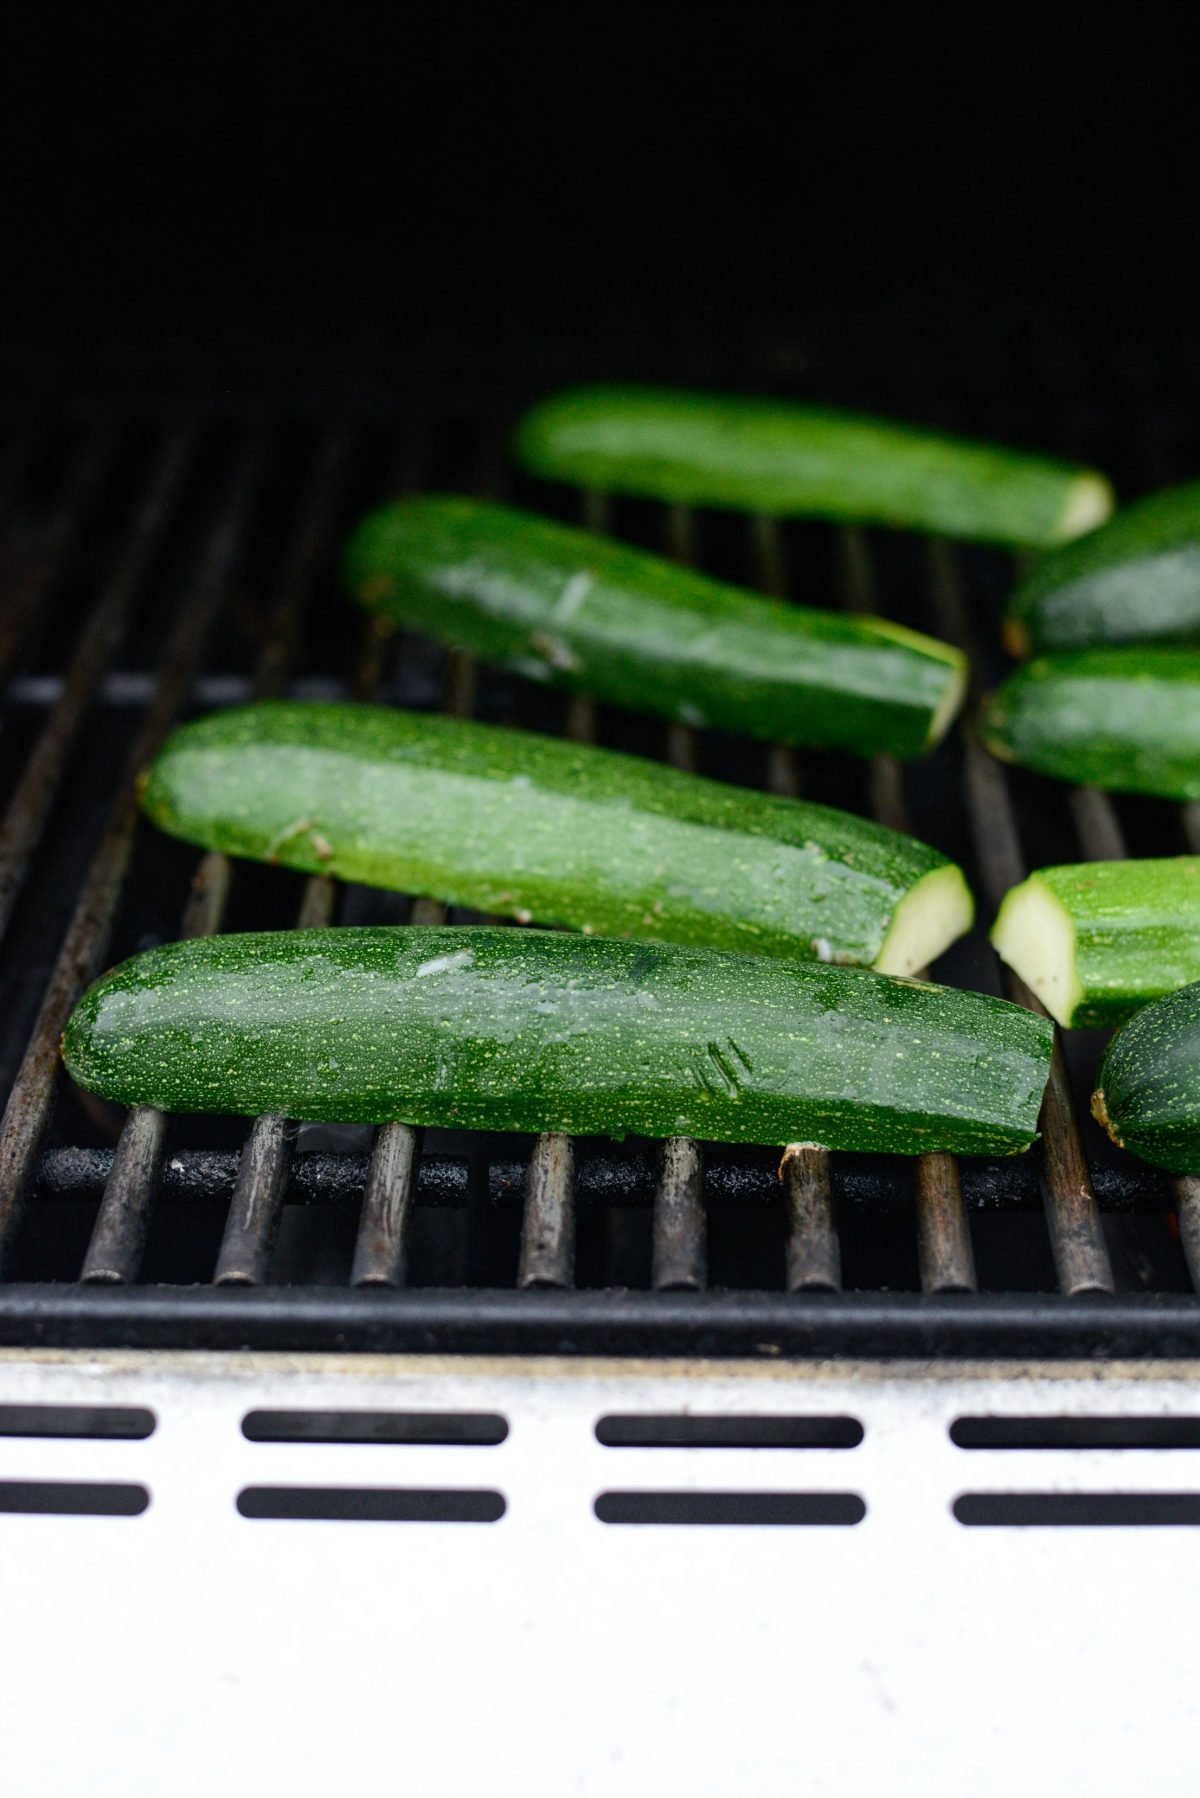 grilling zucchinis